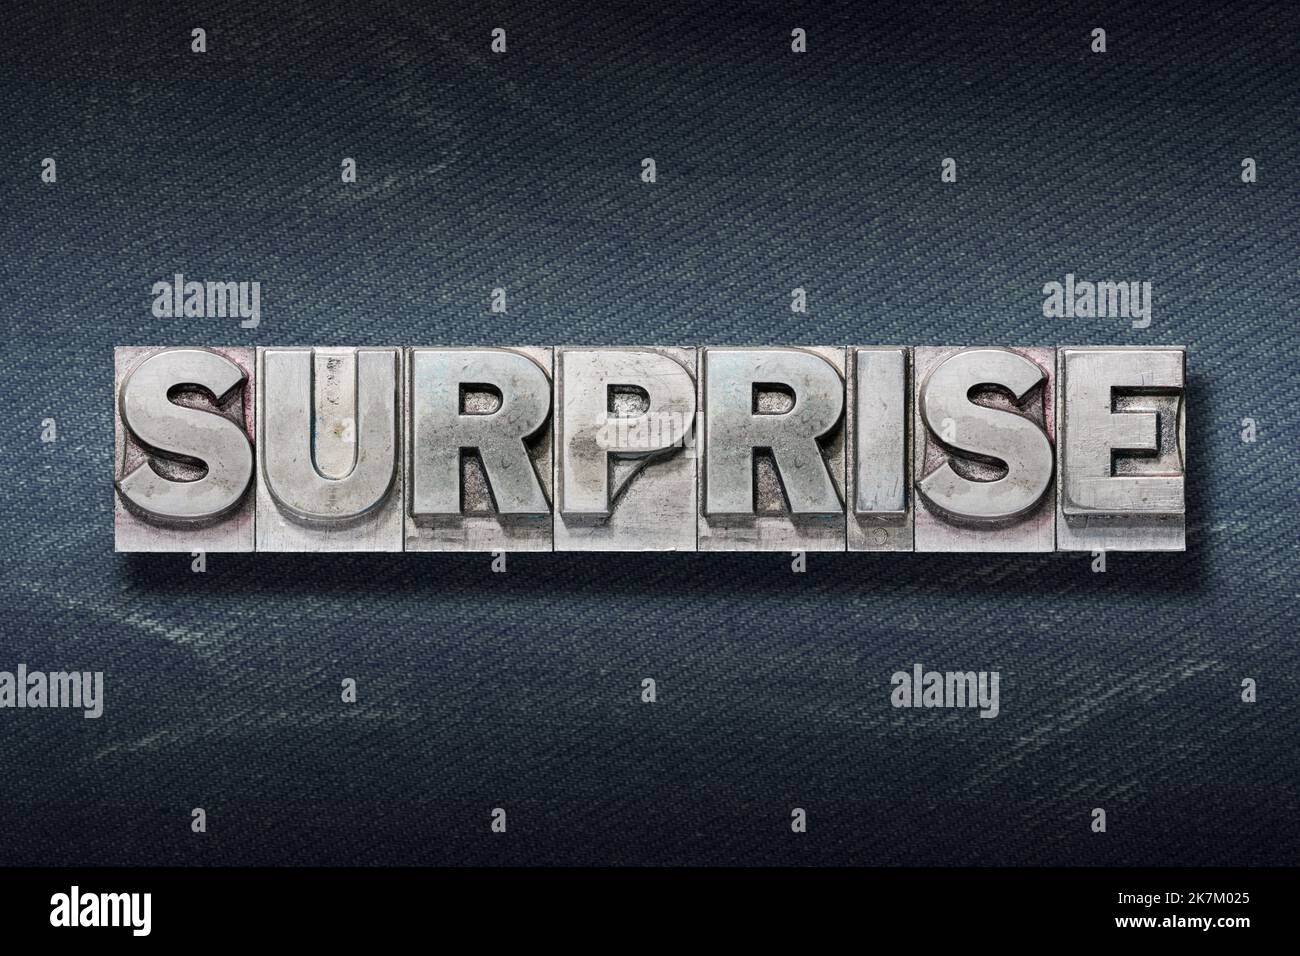 surprise word made from metallic letterpress on dark jeans background Stock Photo